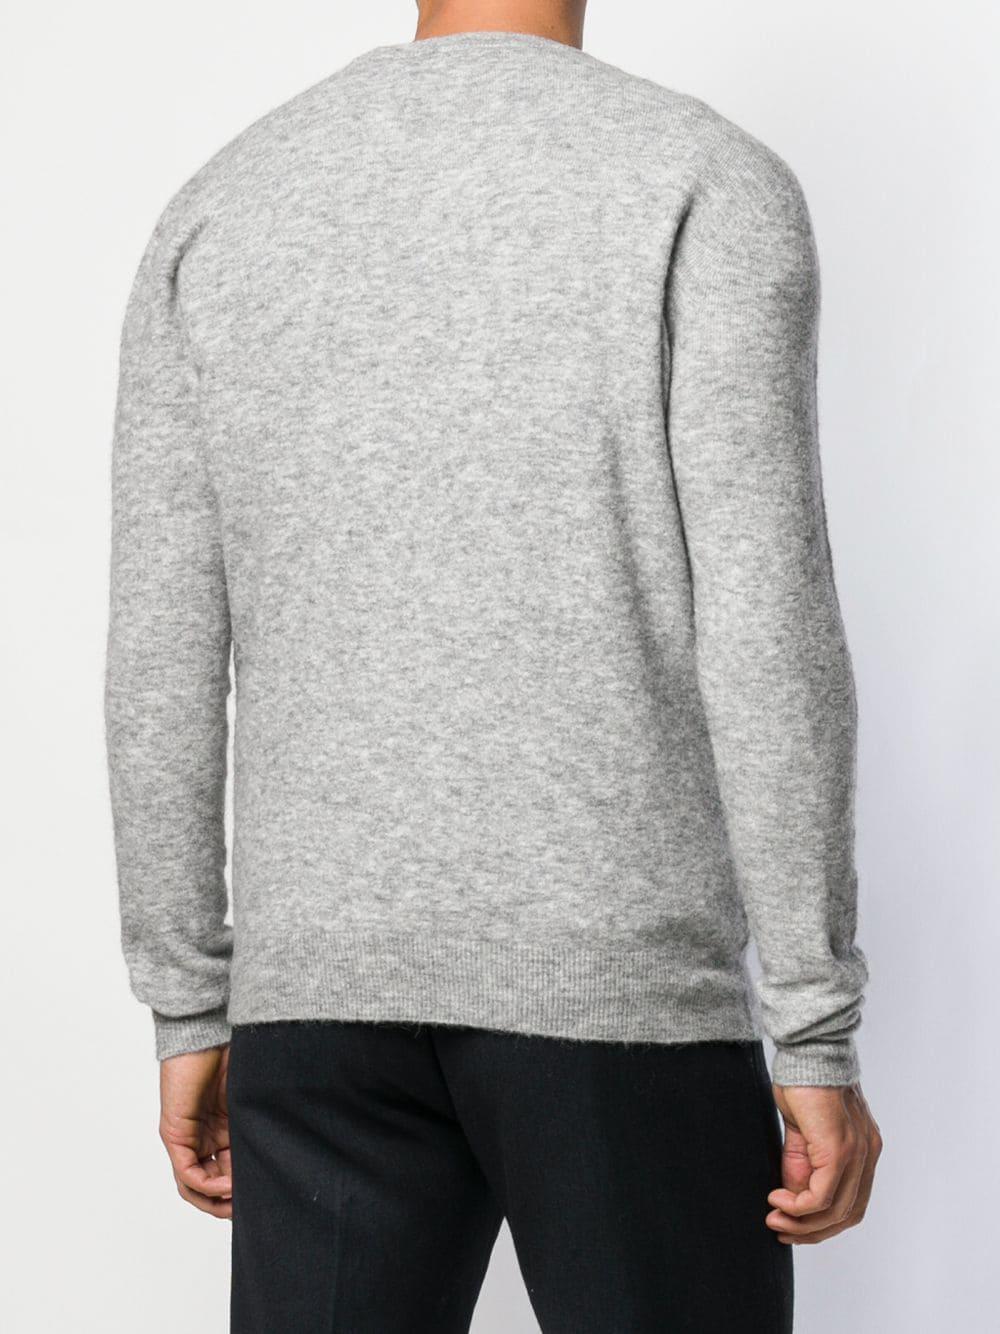 Roberto Collina Synthetic Crew Neck Sweater in Grey (Gray) for Men - Lyst